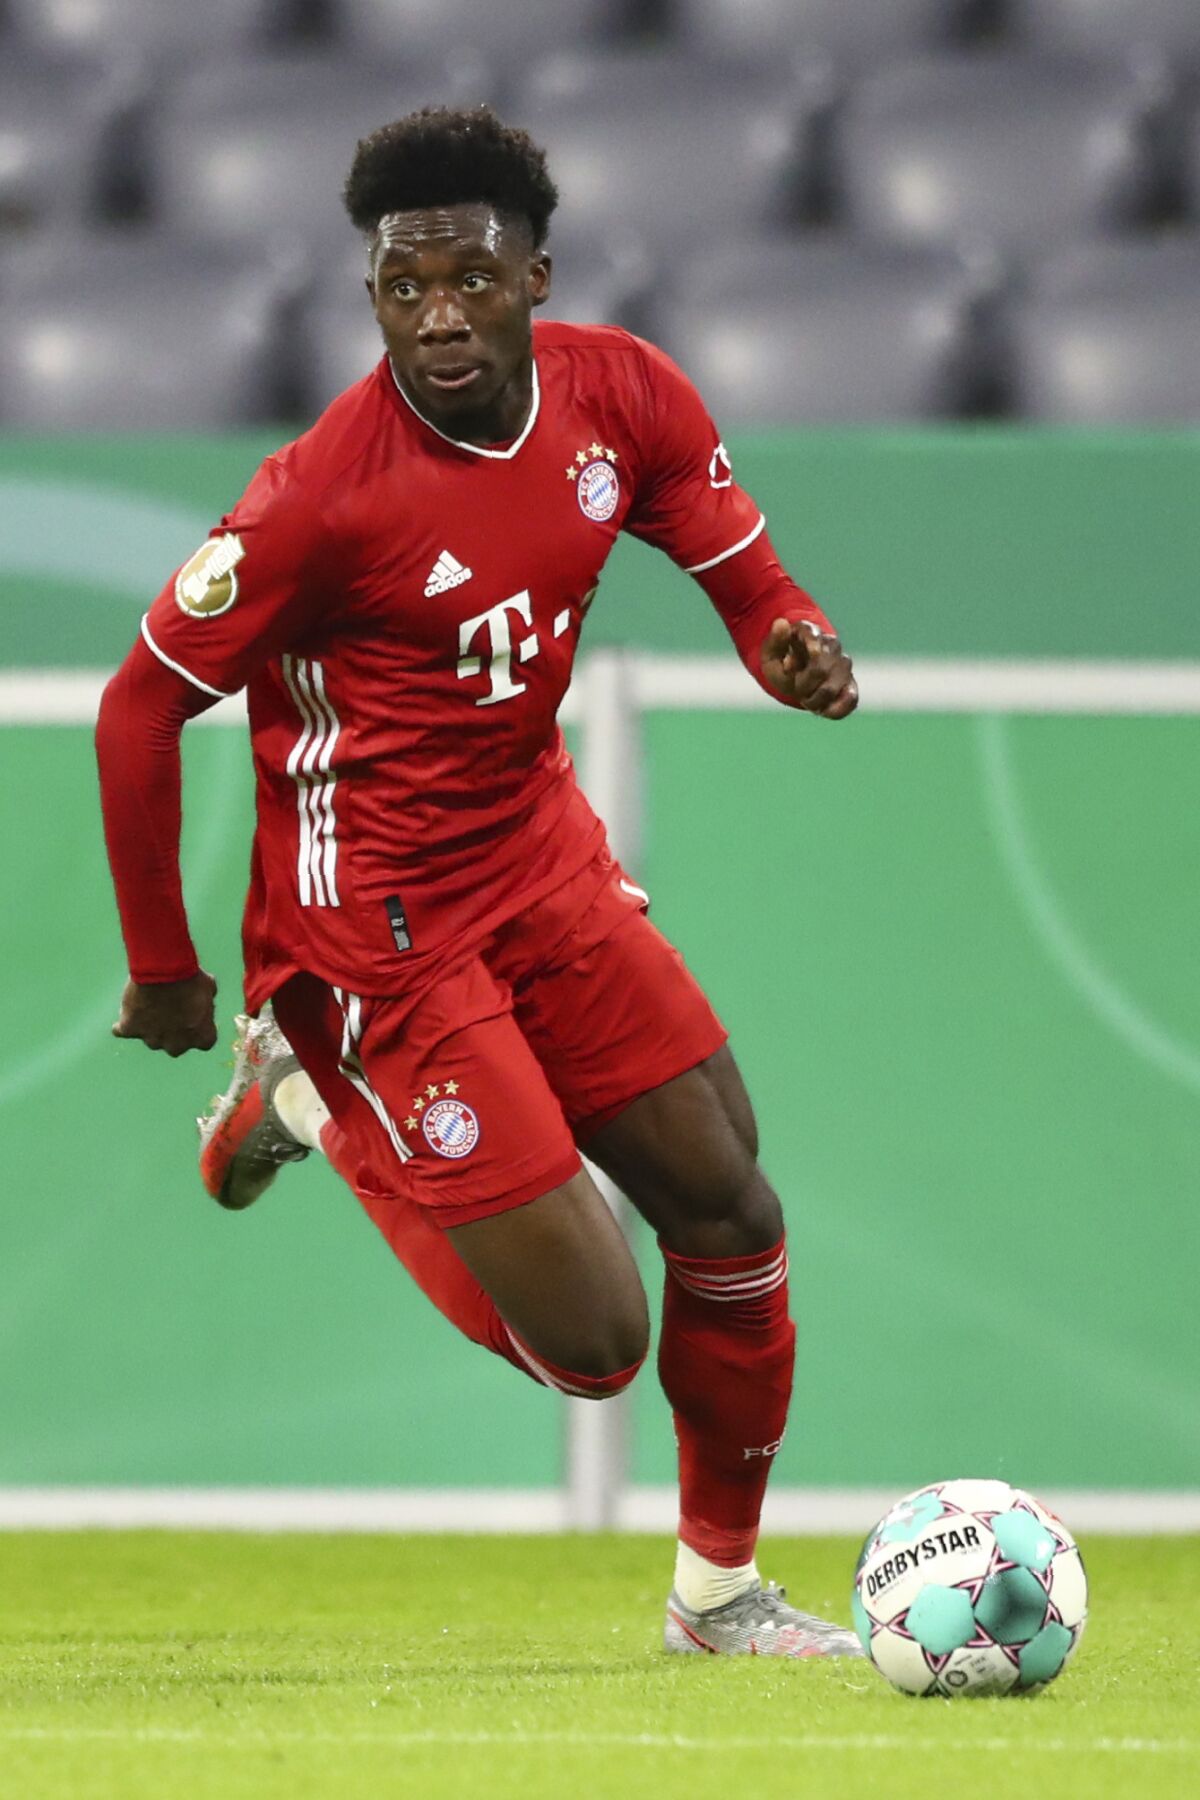 File- File picture taken Oct.15, 2020 shows Bayern's Alphonso Davies during the 1st round German Soccer Cup match between FC Bayern Munich and FC Duren, at the Allianz Arena in Munich, Germany. (AP Photo/ Matthias Schrader, file)